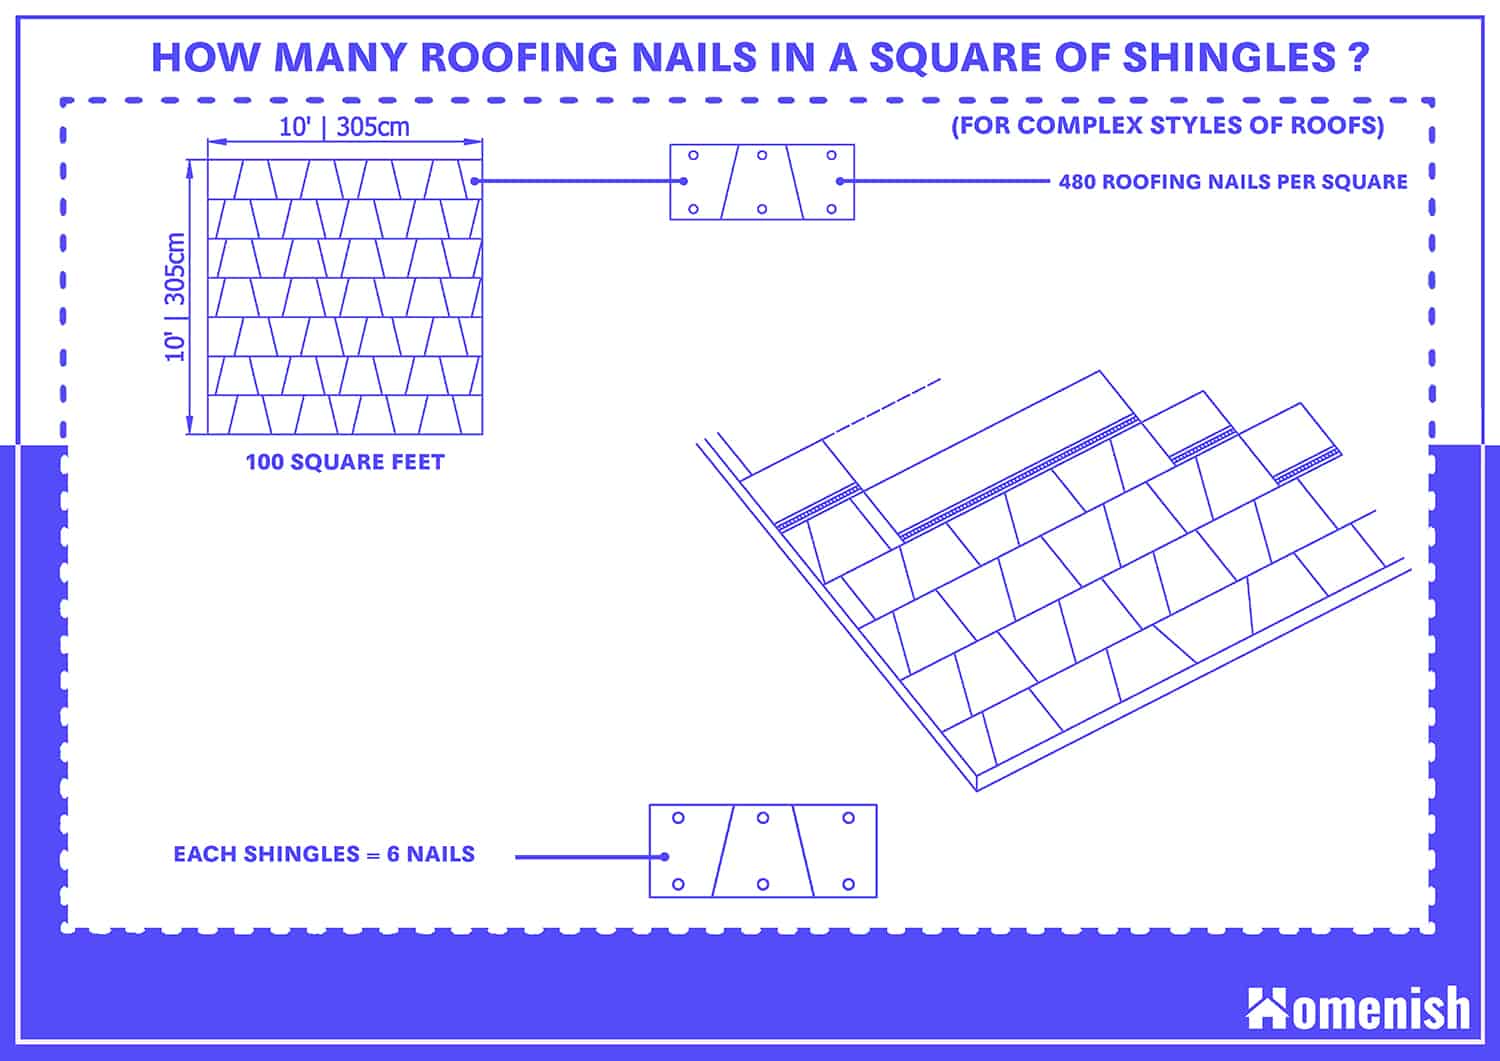 How many Roofing Nails in a Square of Shingles? (For Complex styles of roofs)